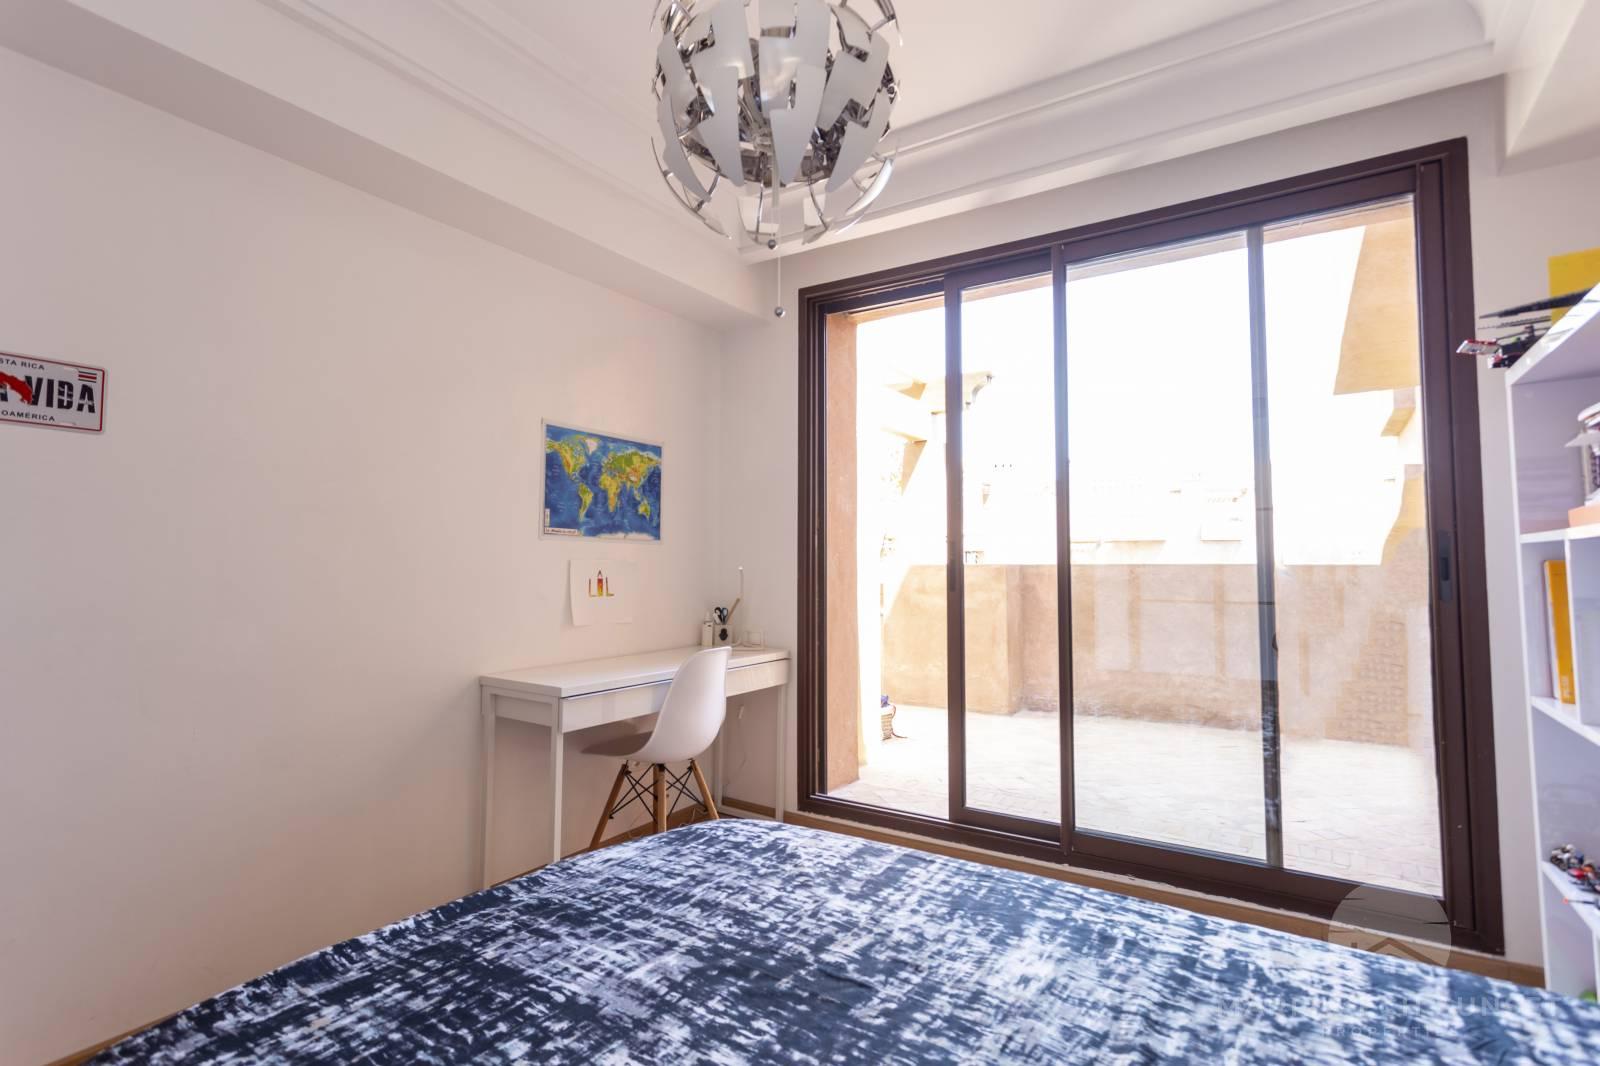 Duplex apartment for sale in Marrakech in a residential complex